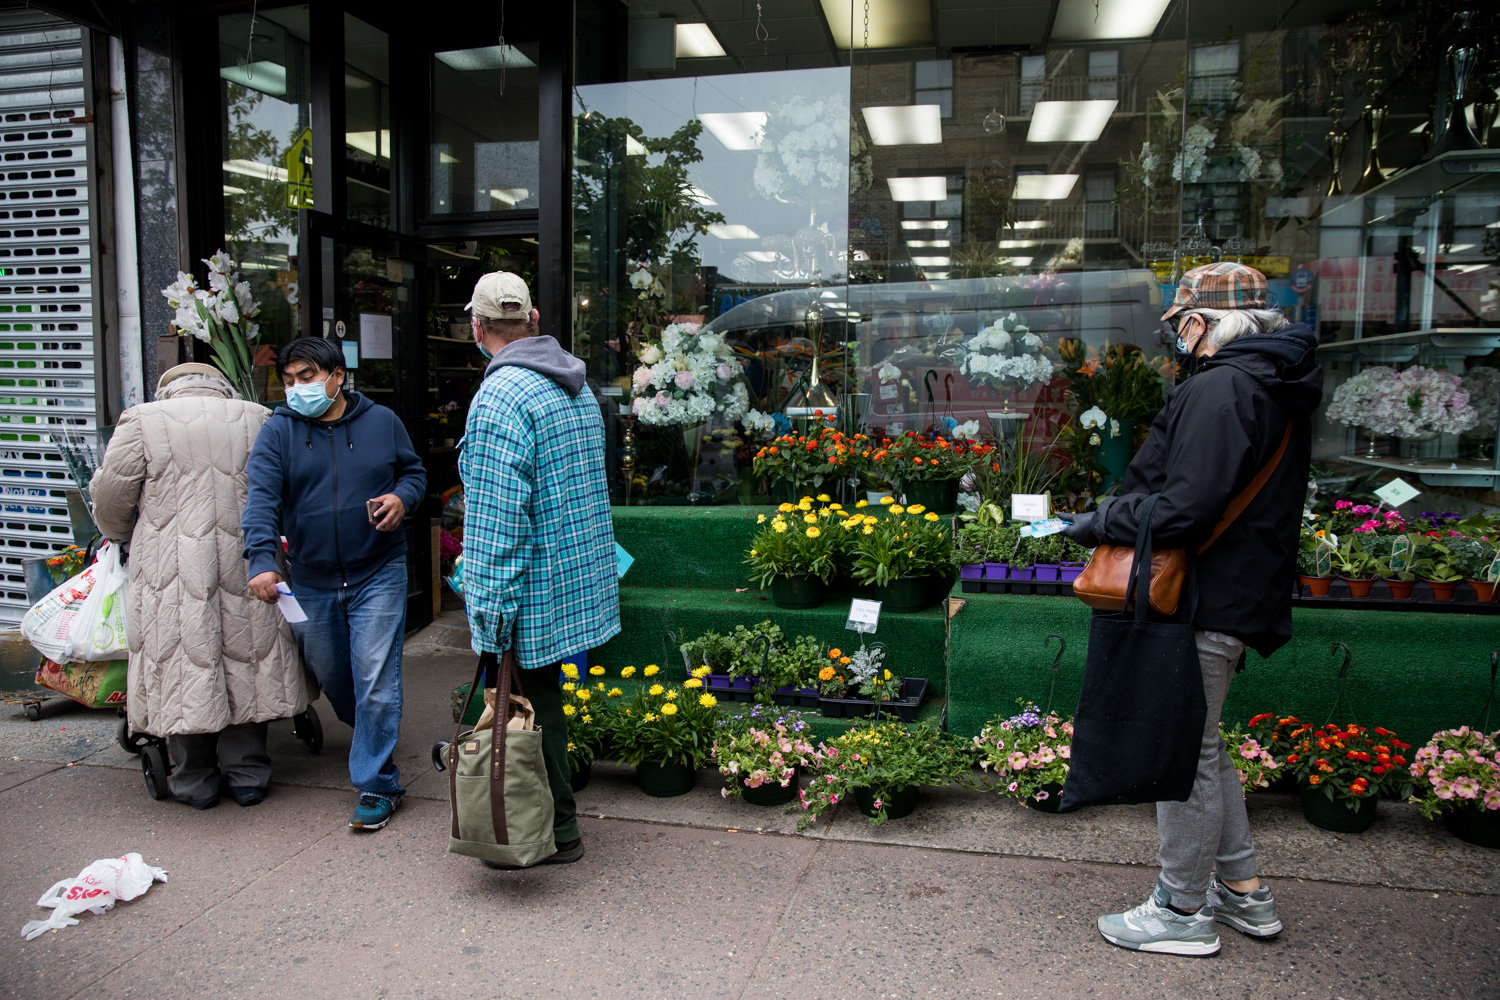 Customers line up along West 231st Street to wait — making an effort to maintain six feet of distance — to get a few minutes inside Columbia Florist just before Mother’s Day.